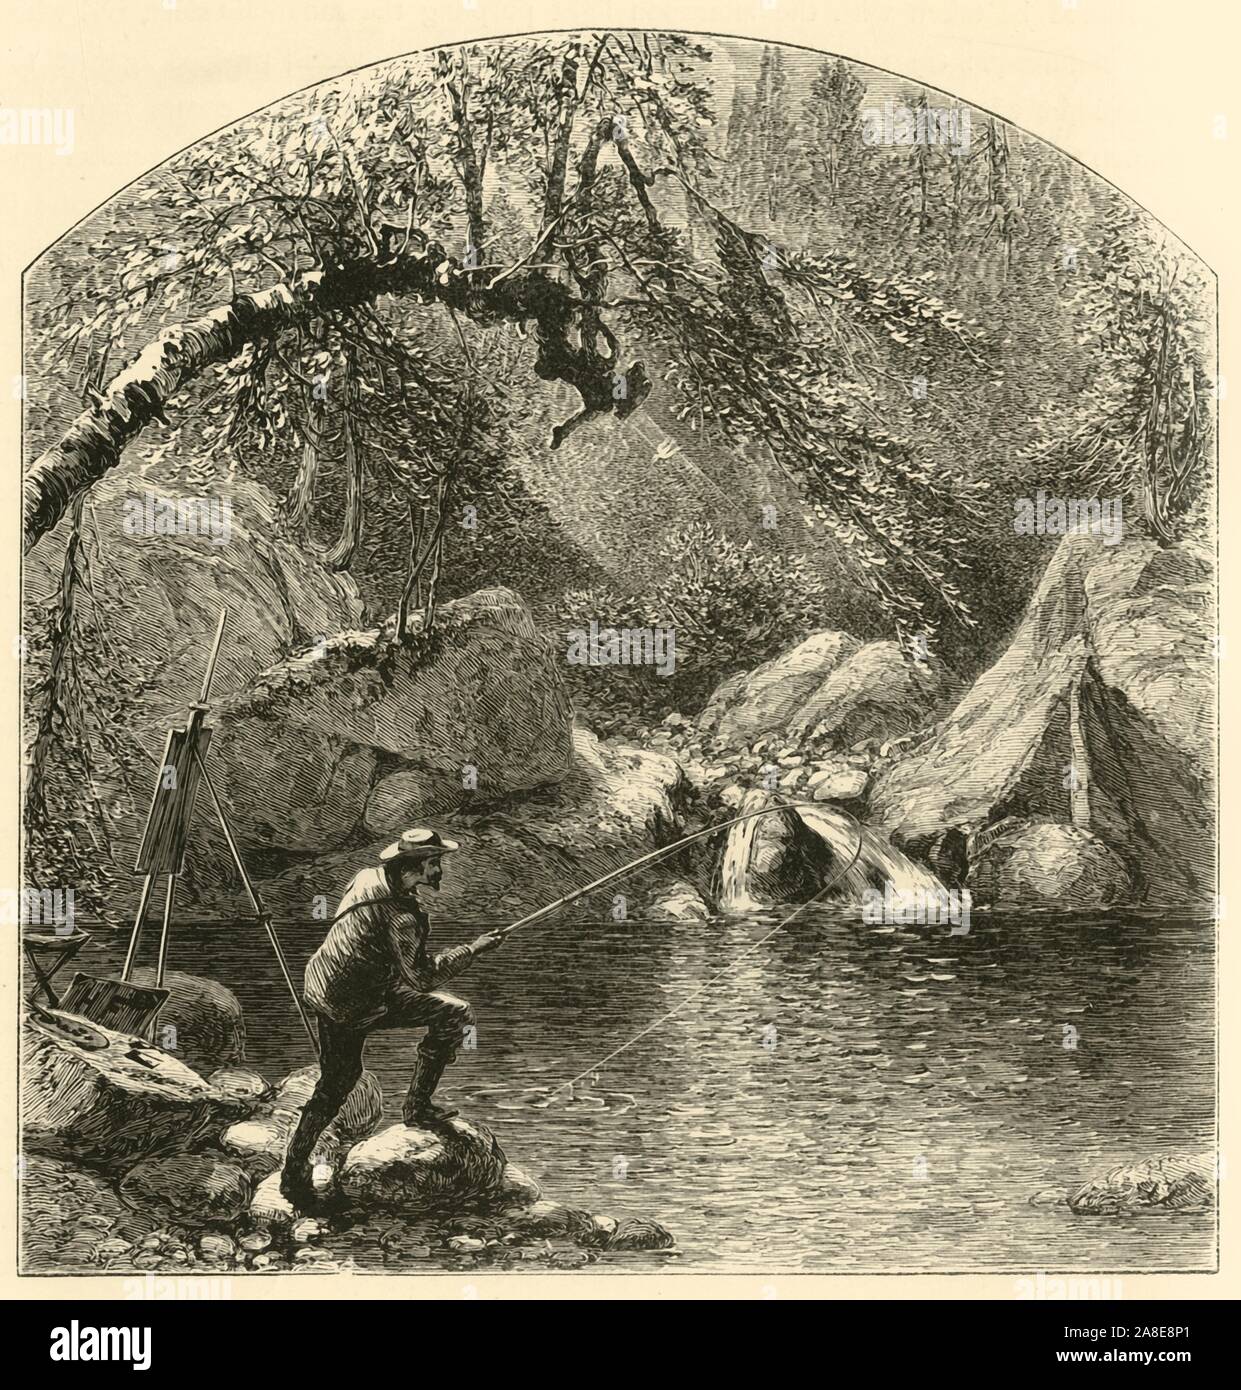 'Emerald Pool, Peabody-River Glen', 1872. An artist takes a break from painting to fish in a river in the White Mountains, New Hampshire, USA. This is possibly a self portrait of the English-born American illustrator and engraver Harry Fenn (1845-1911), whose initials appear on the open lid of the paintbox. From &quot;Picturesque America; or, The Land We Live In, A Delineation by Pen and Pencil of the Mountains, Rivers, Lakes...with Illustrations on Steel and Wood by Eminent American Artists&quot; Vol. I, edited by William Cullen Bryant. [D. Appleton and Company, New York, 1872] Stock Photo